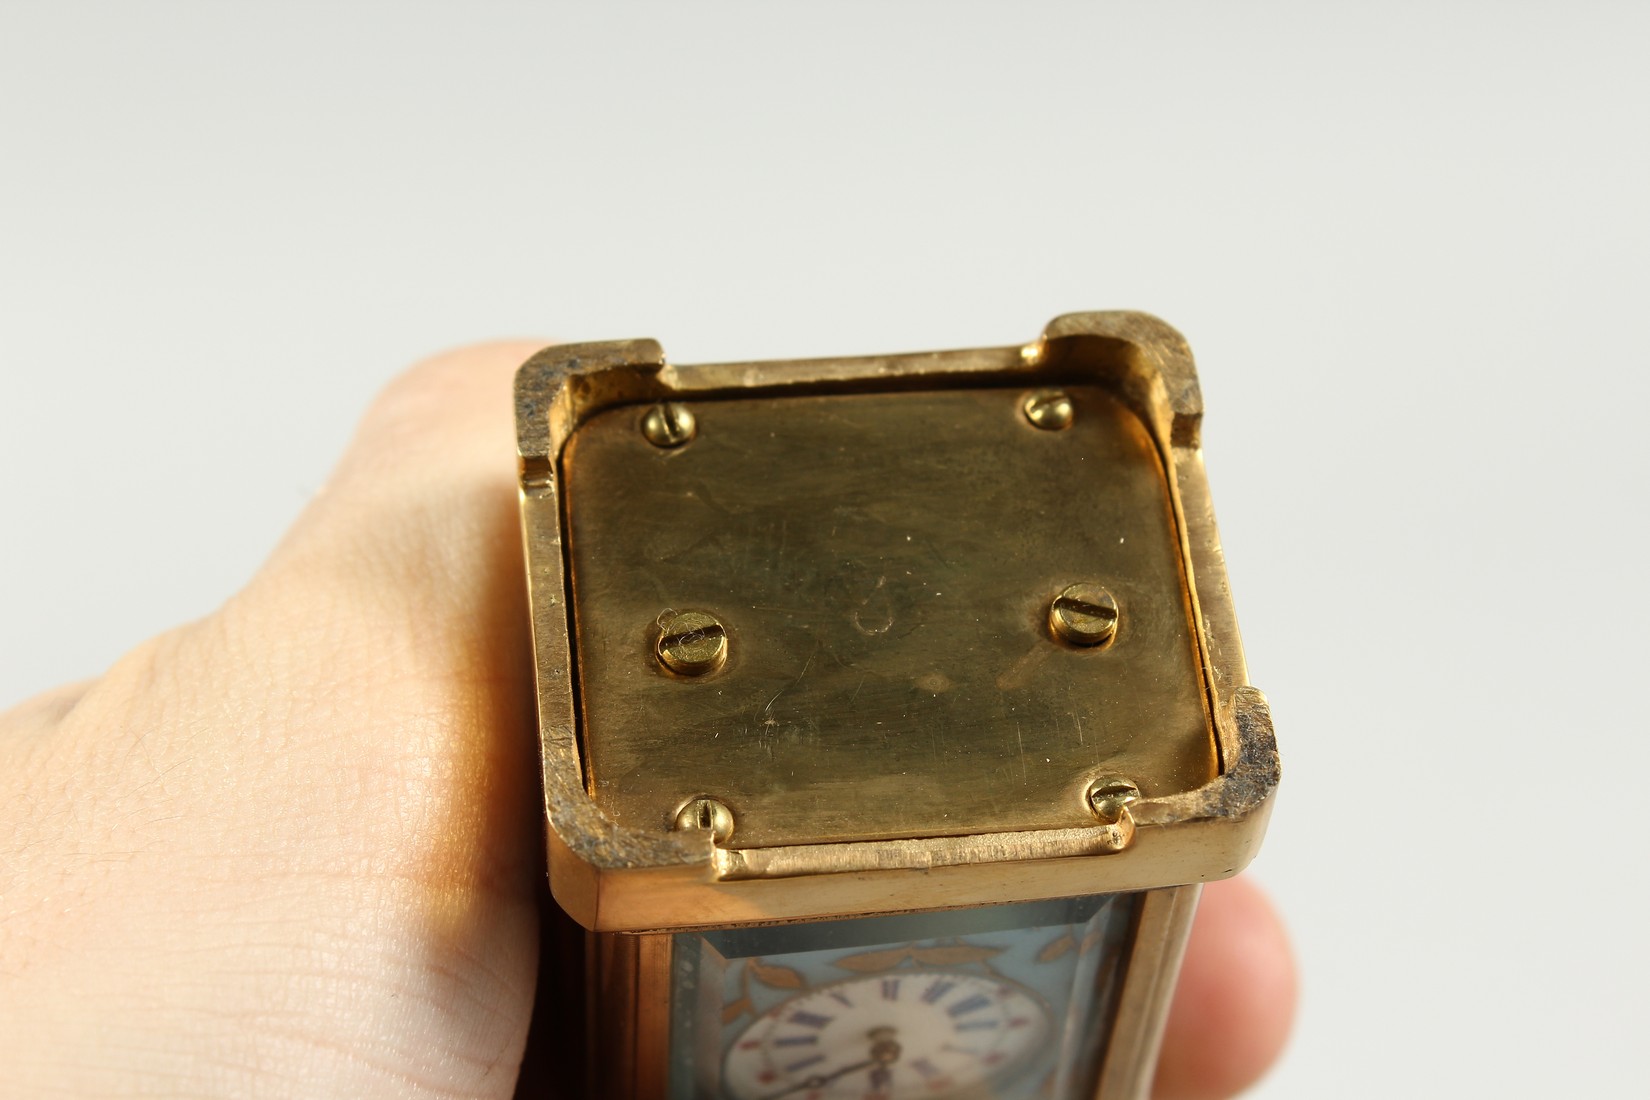 A MINIATURE SEVRES CARRIAGE CLOCK with flora porcelain panels. 2.25ins high. - Image 6 of 7